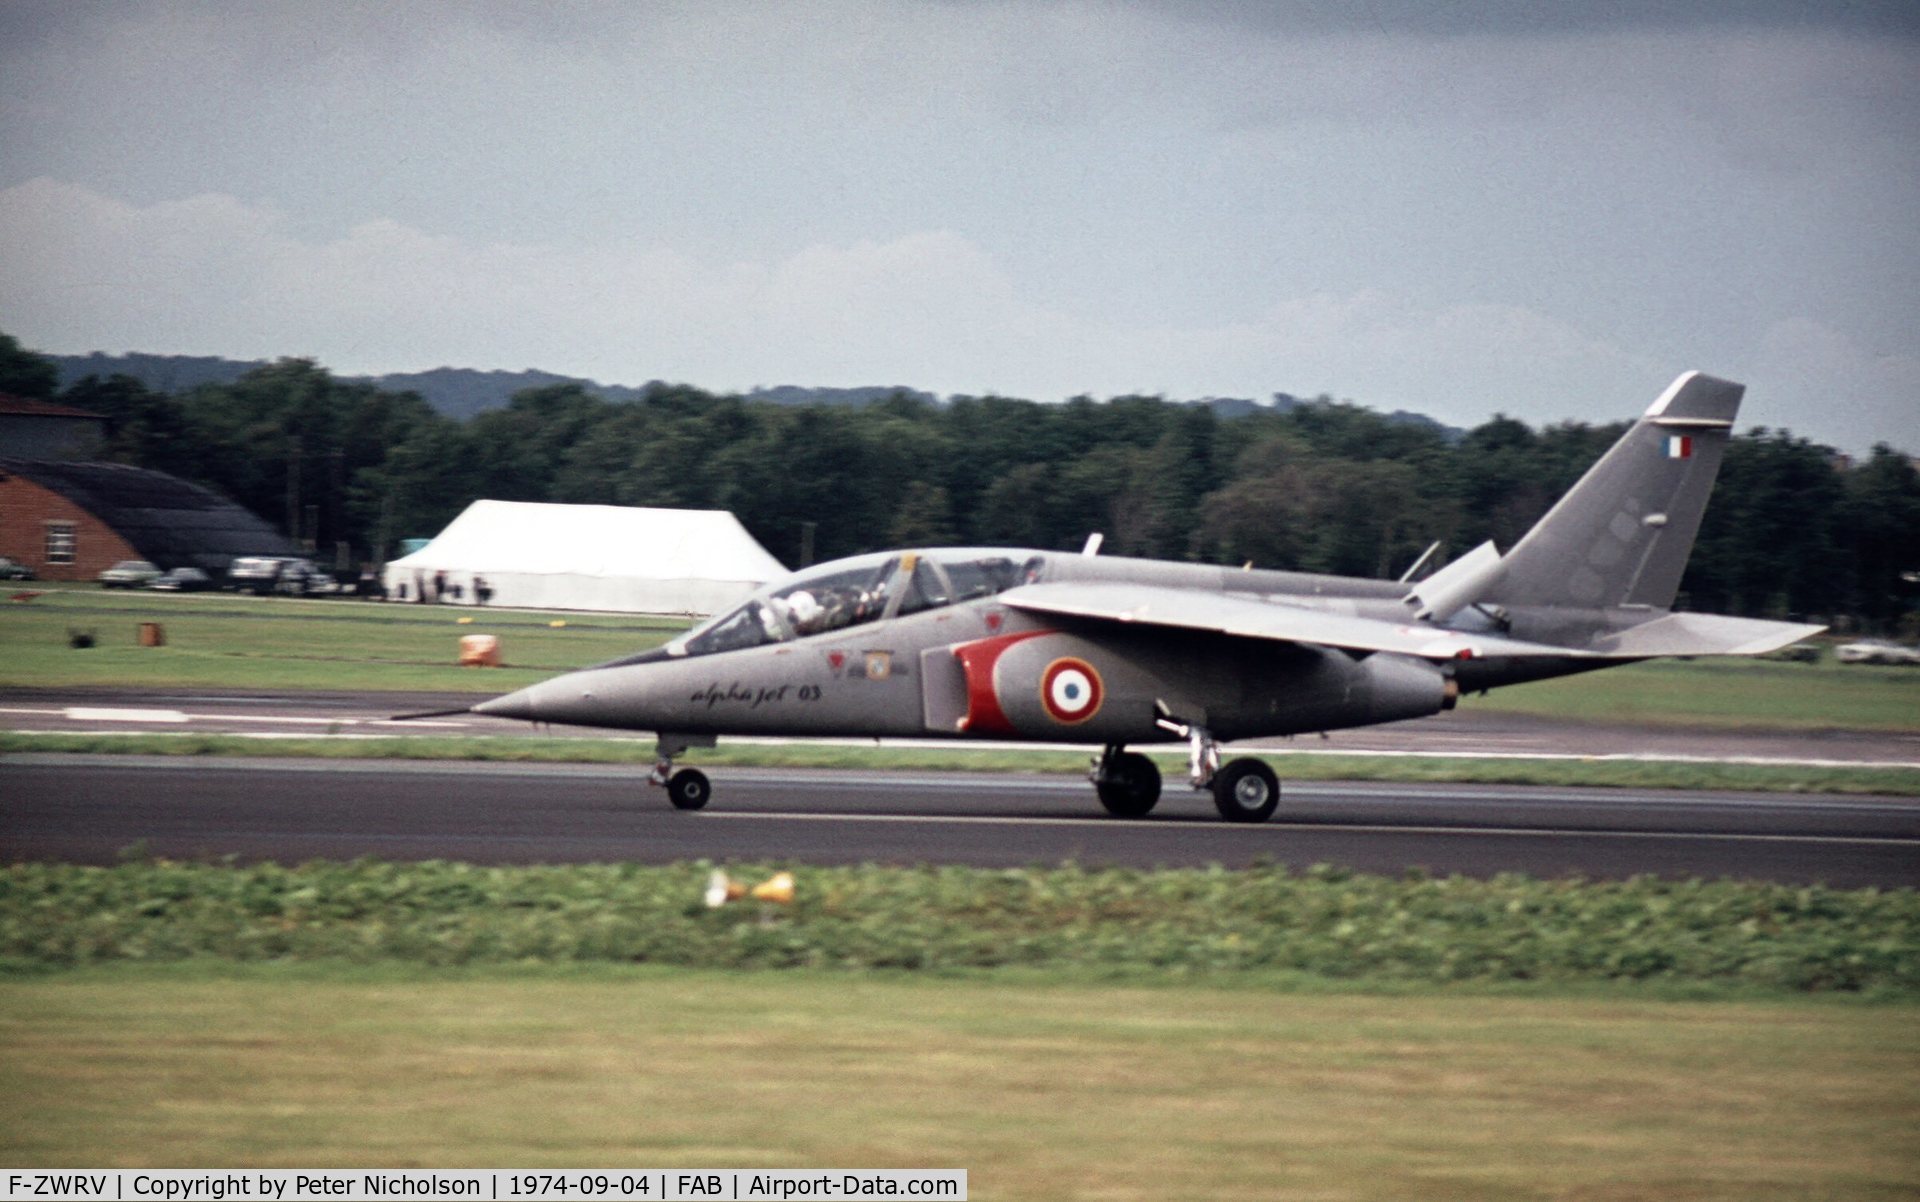 F-ZWRV, Dassault-Dornier Alpha Jet E C/N 03, The third prototype Alpha Jet was demonstrated at the 1974 Farnborough Airshow. It was used for weapons delivery trials and later became serial 40+01.